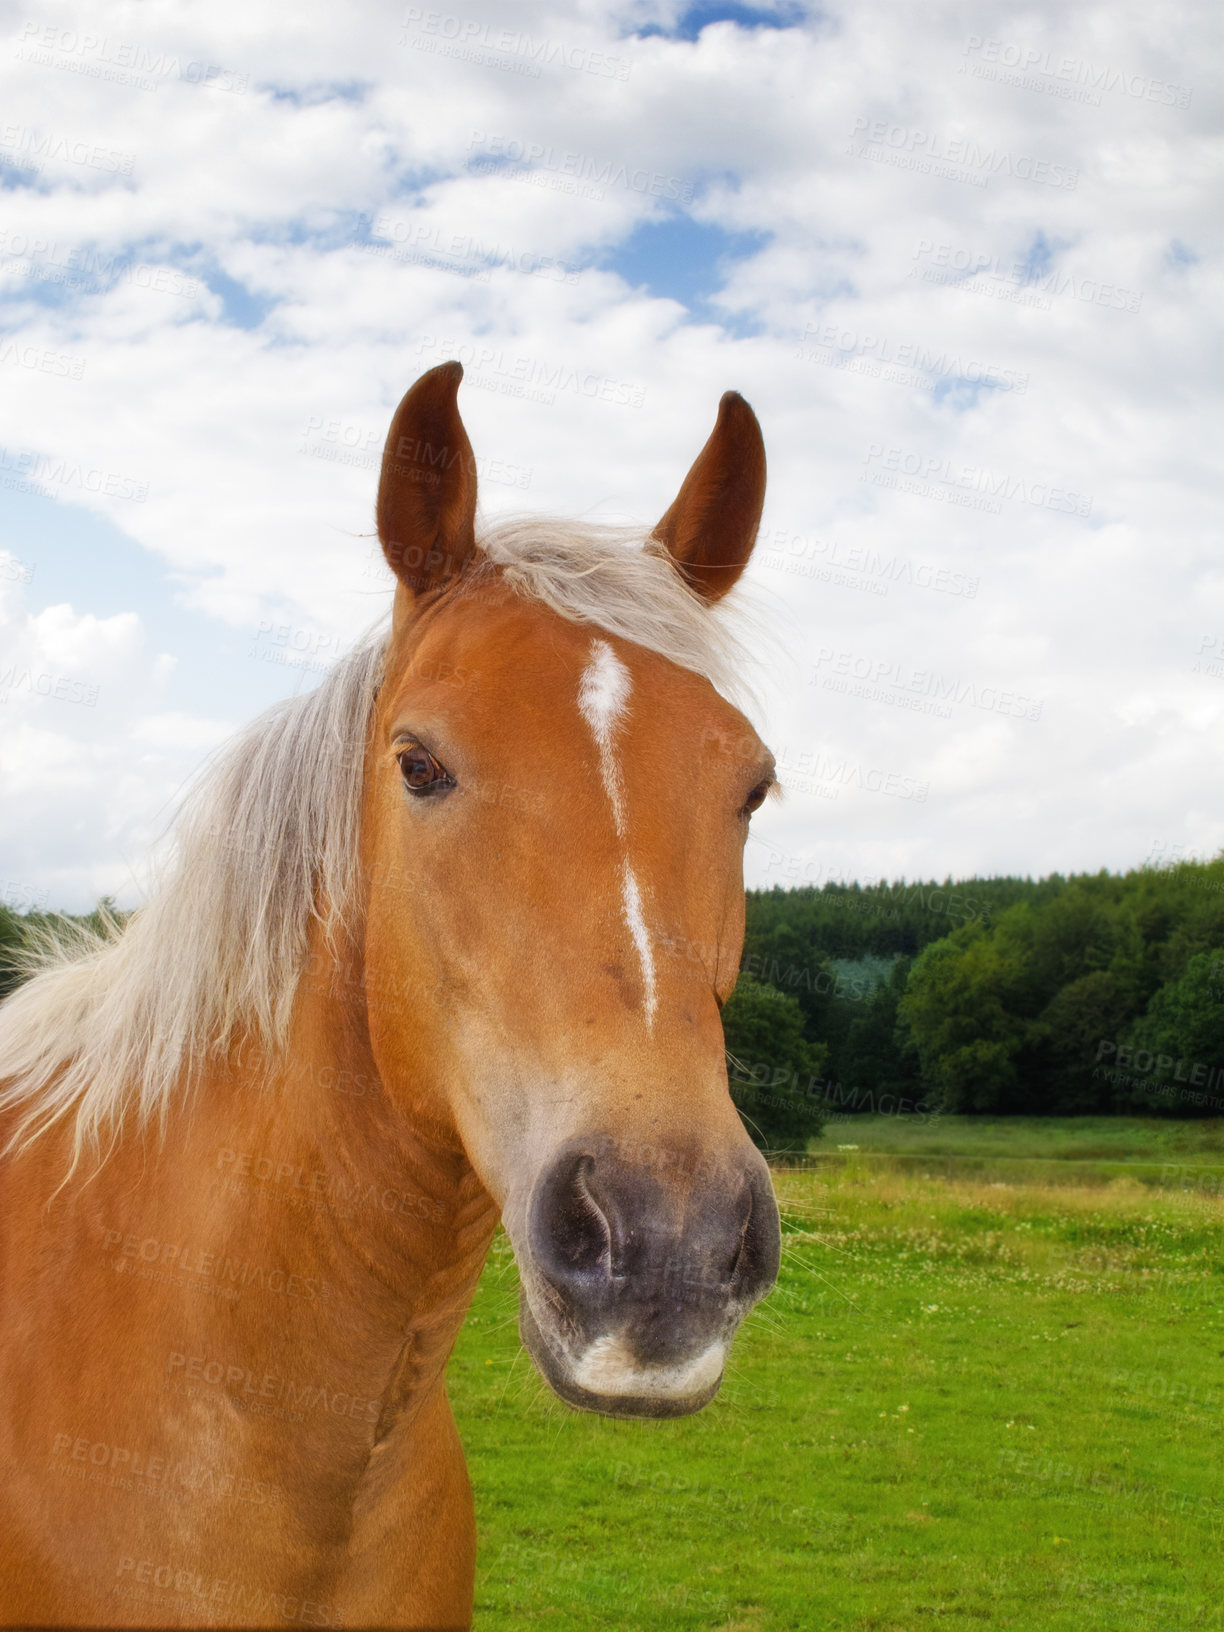 Buy stock photo Portrait of a brown horse on a field outside. Animal in grass farm land near a forest on a cloudy day. Chestnut pony grazing on a lush spring landscape. Lovely nature scene of rural green meadow